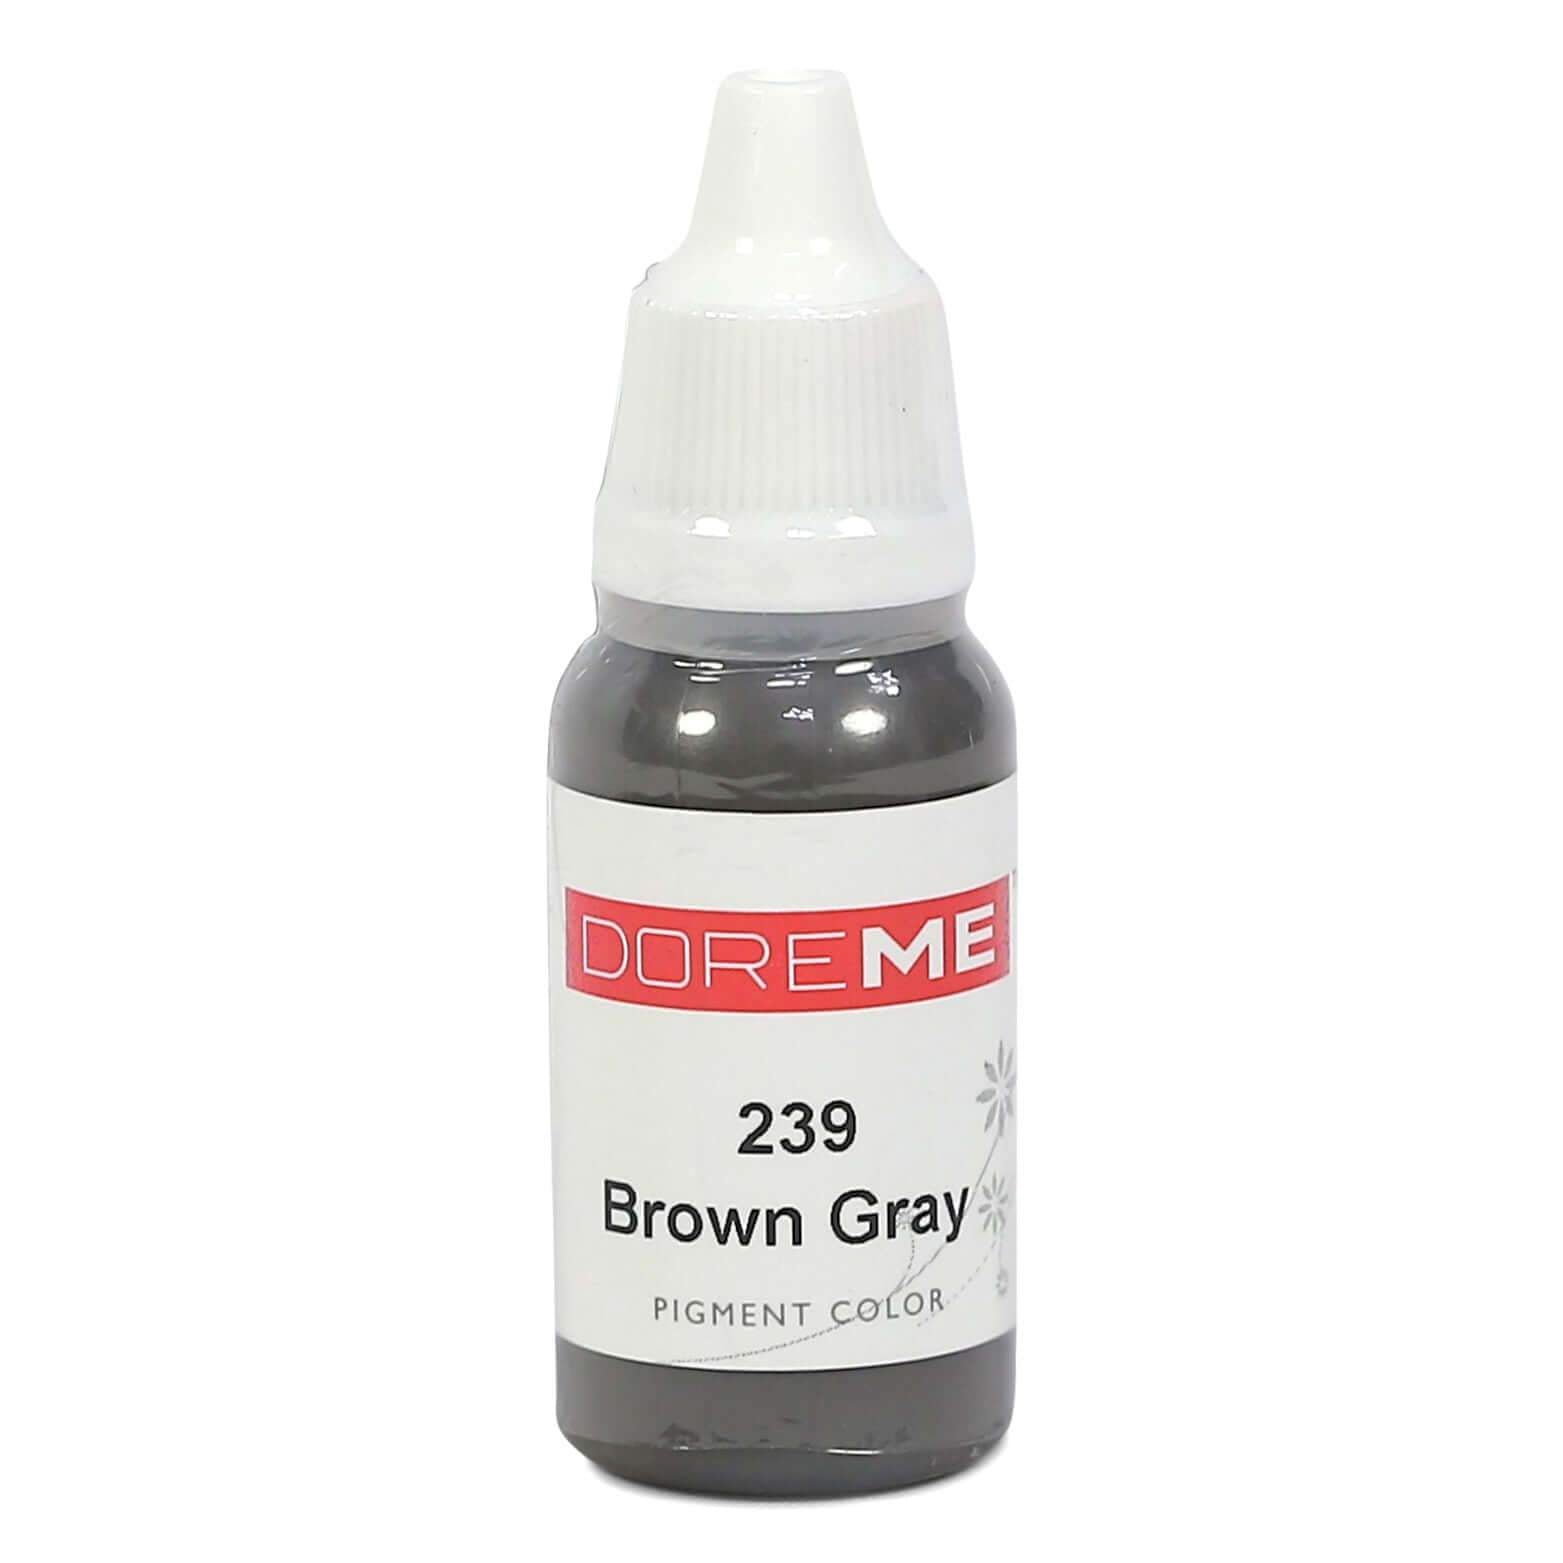 Permanent Makeup pigments Doreme Micropigmentation Eyebrow, Eyeliner, Lip Colours 239 Brown Grey (c) - Beautiful Ink UK trade and wholesale supplier